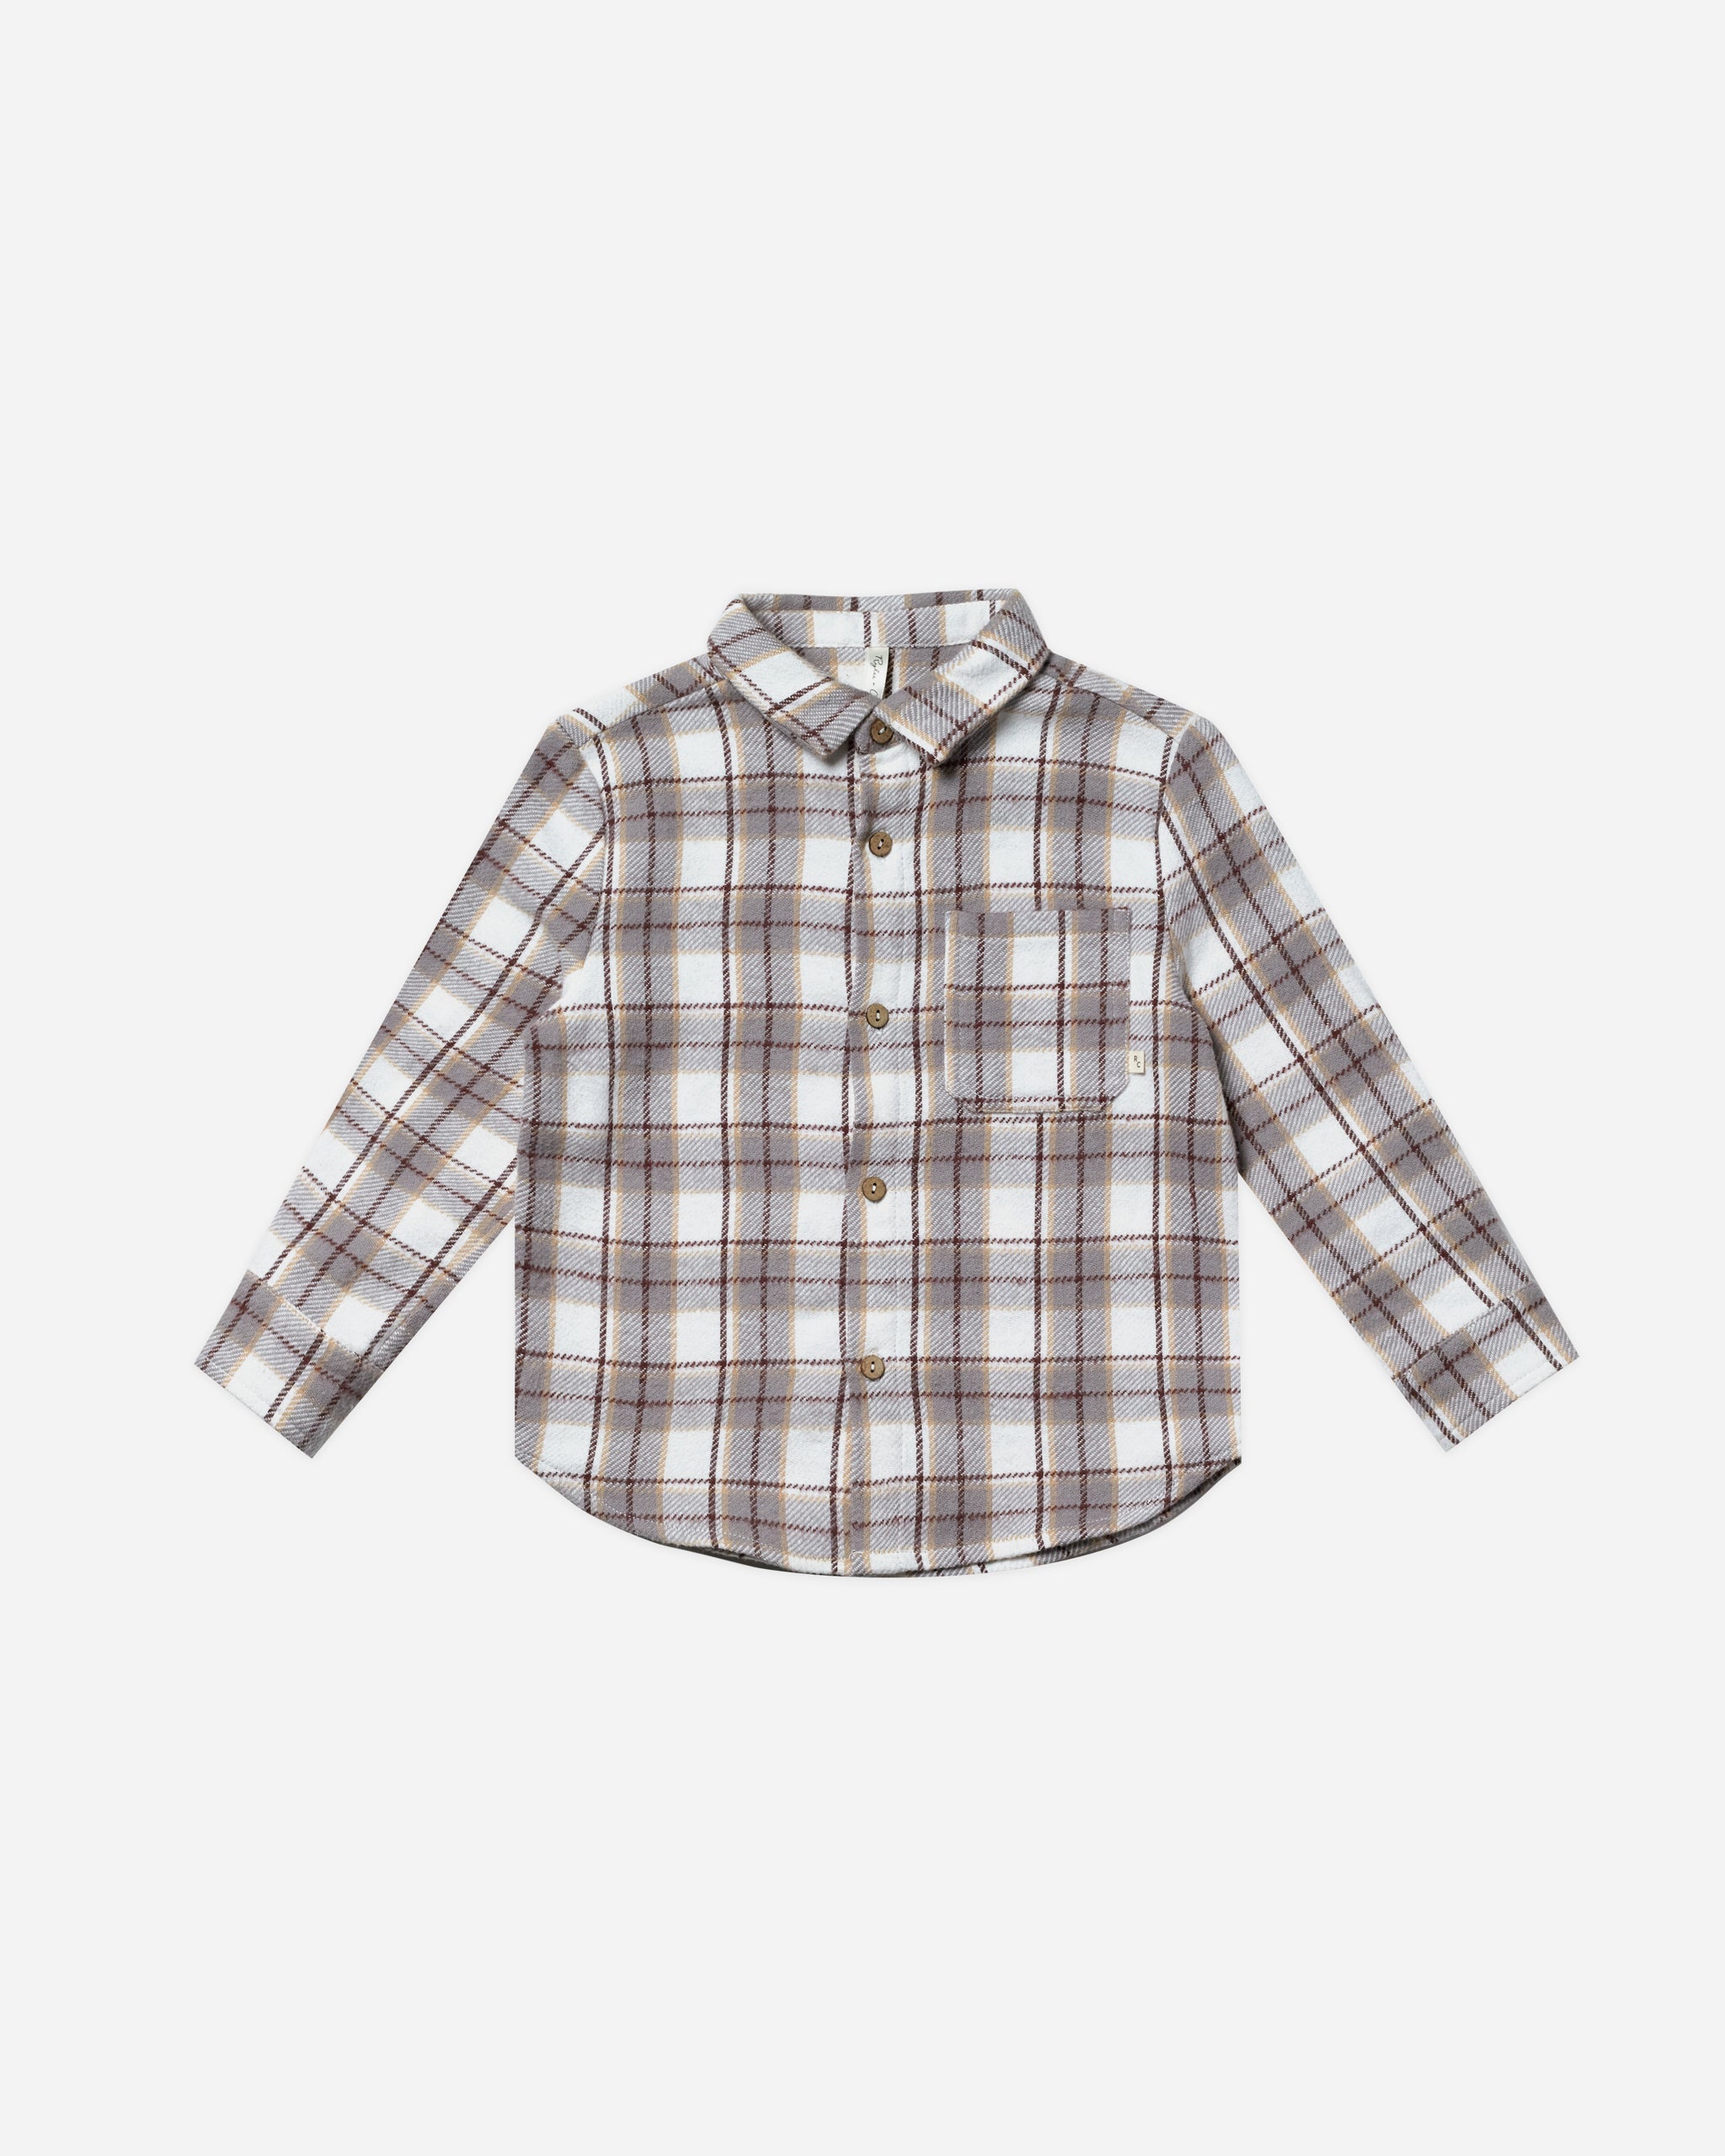 Collared Long Sleeve Shirt || Blue Flannel - Rylee + Cru | Kids Clothes | Trendy Baby Clothes | Modern Infant Outfits |